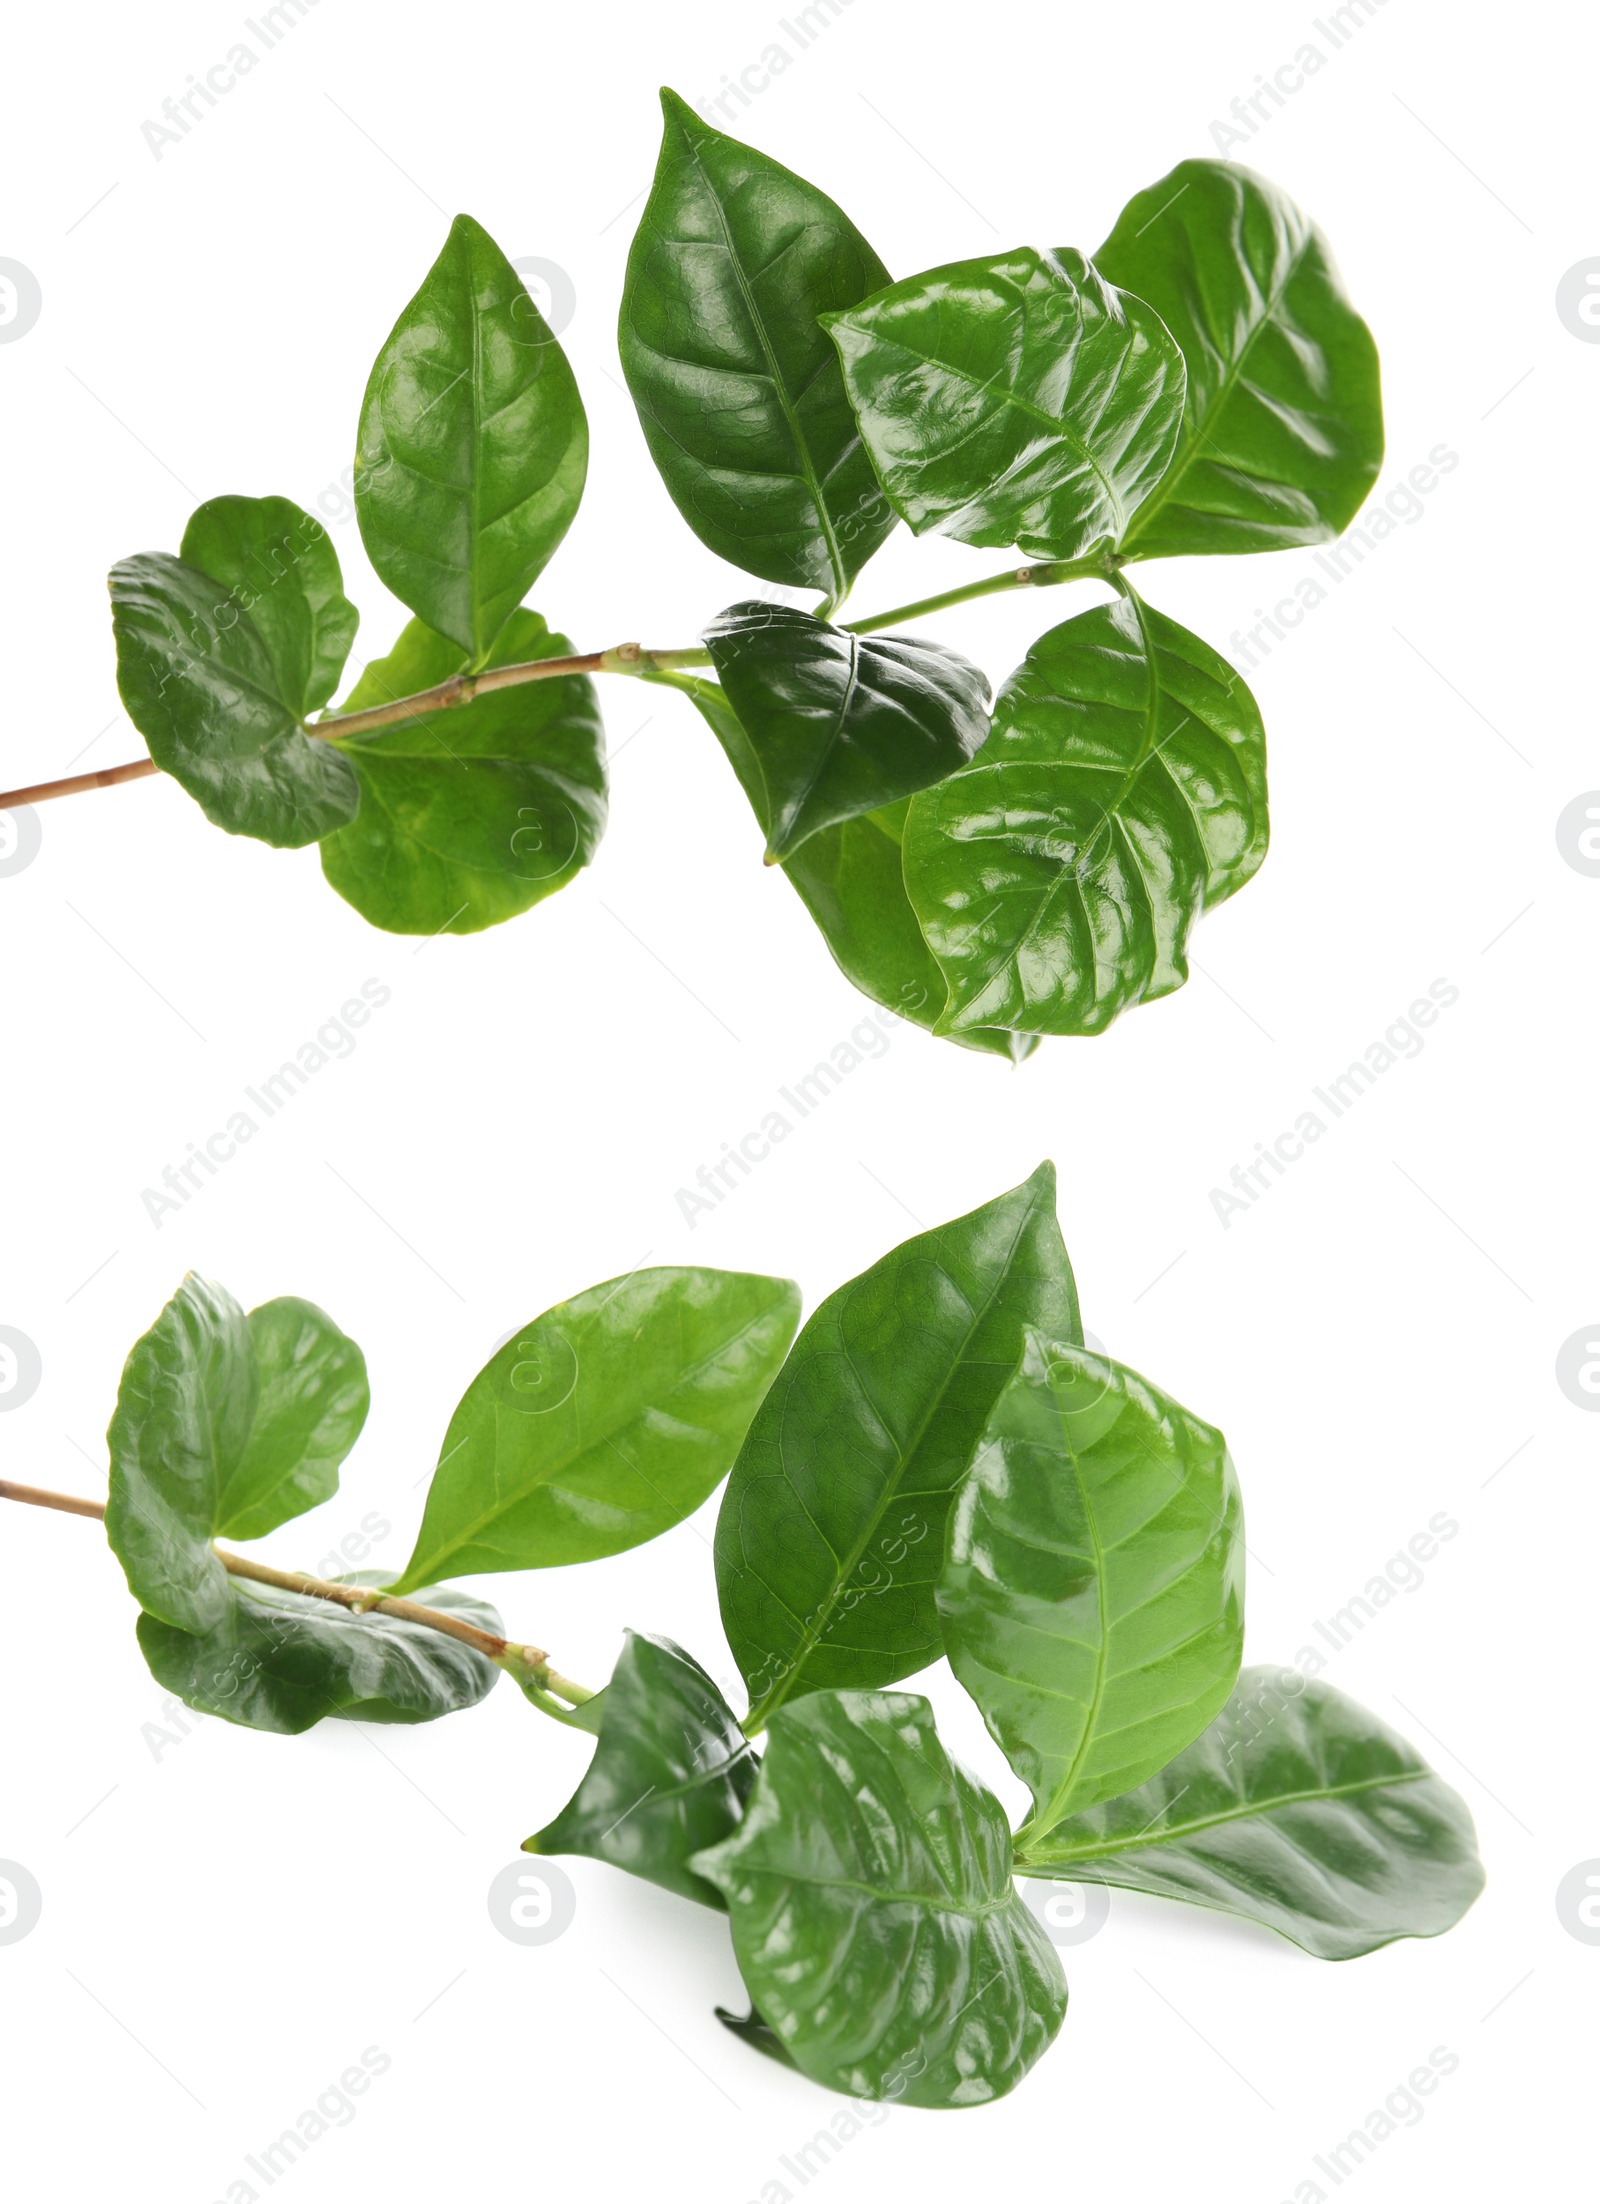 Image of Branches with fresh green leaves of coffee plant on white background, collage